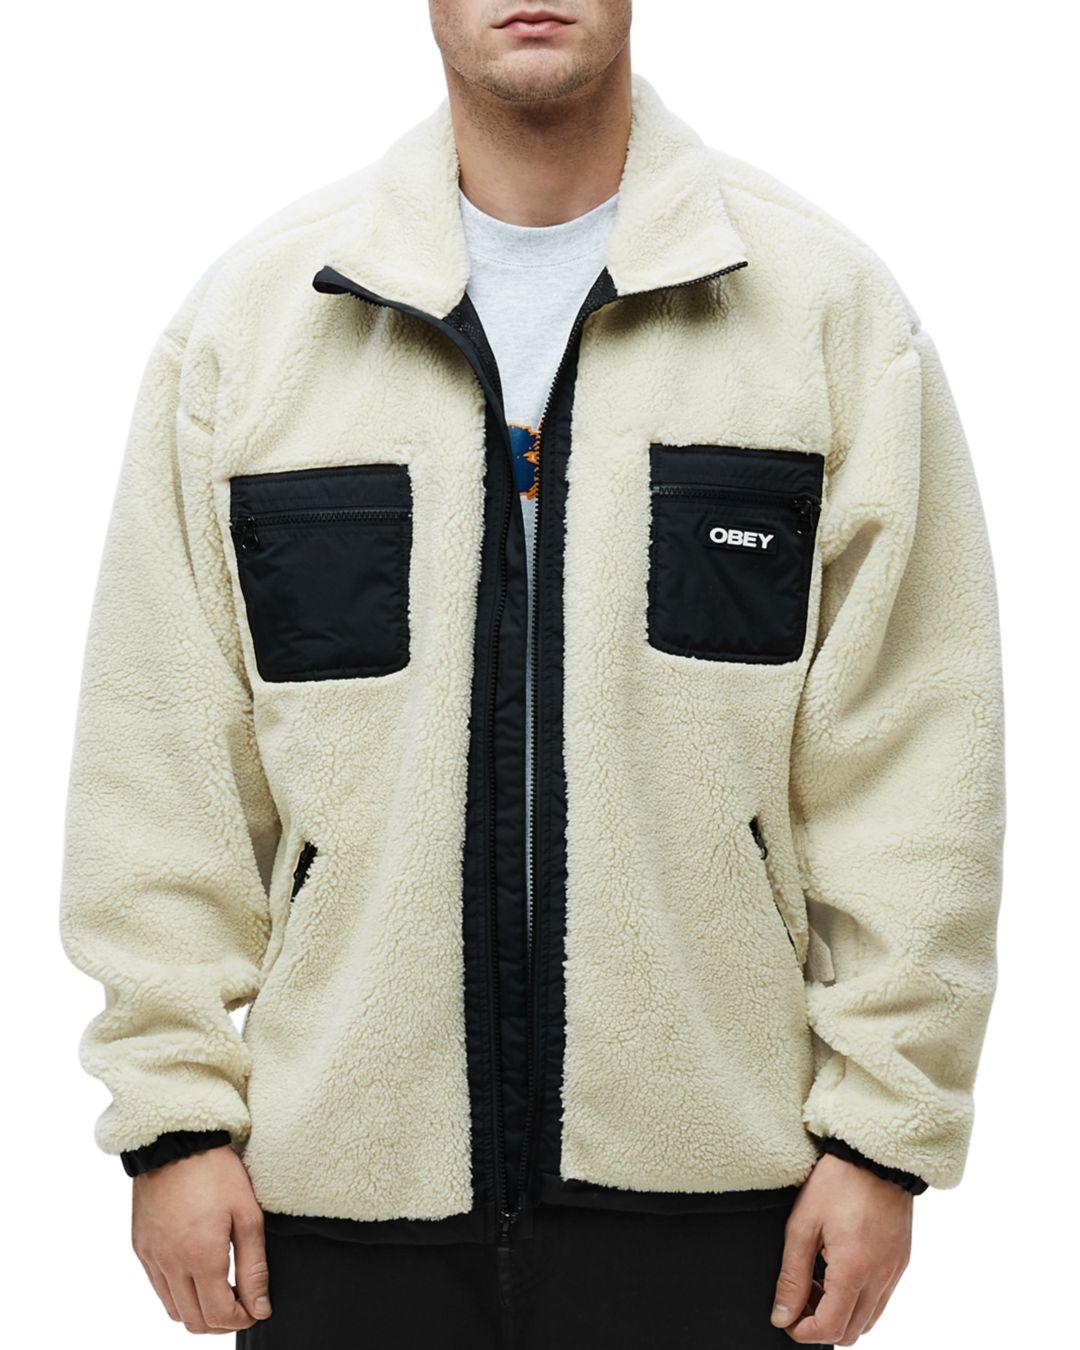 Obey Rubber Out There Sherpa Jacket in Natural for Men - Lyst